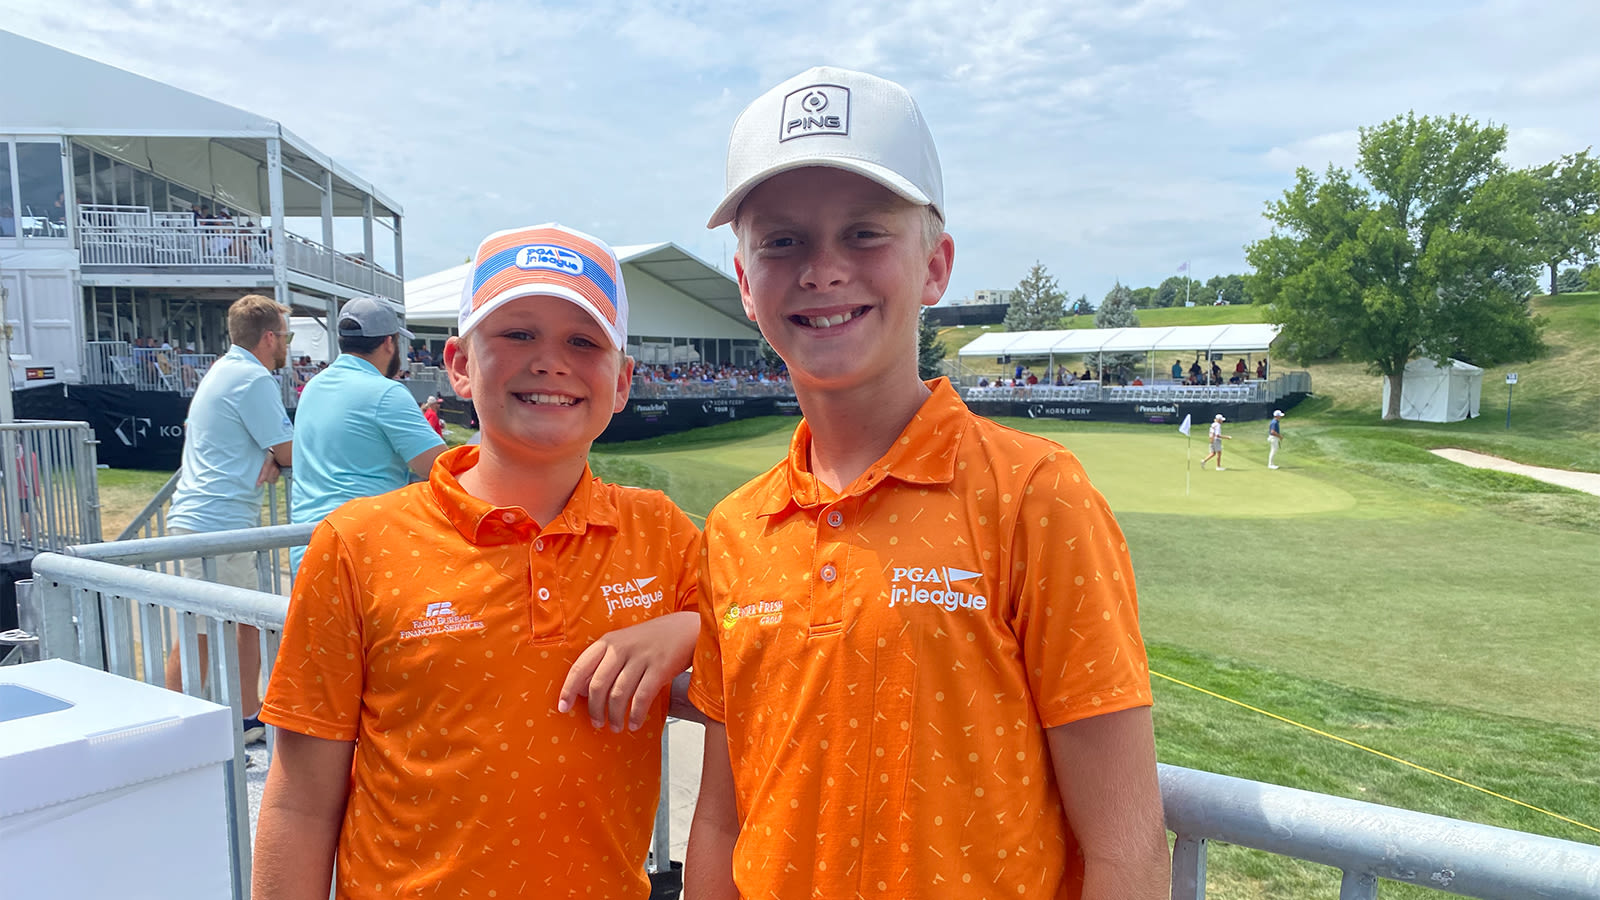 Players from the PGA Jr. League Nebraska PGA Section Championship get inspired by watching the Korn Ferry Tour players compete on the same course as them. 